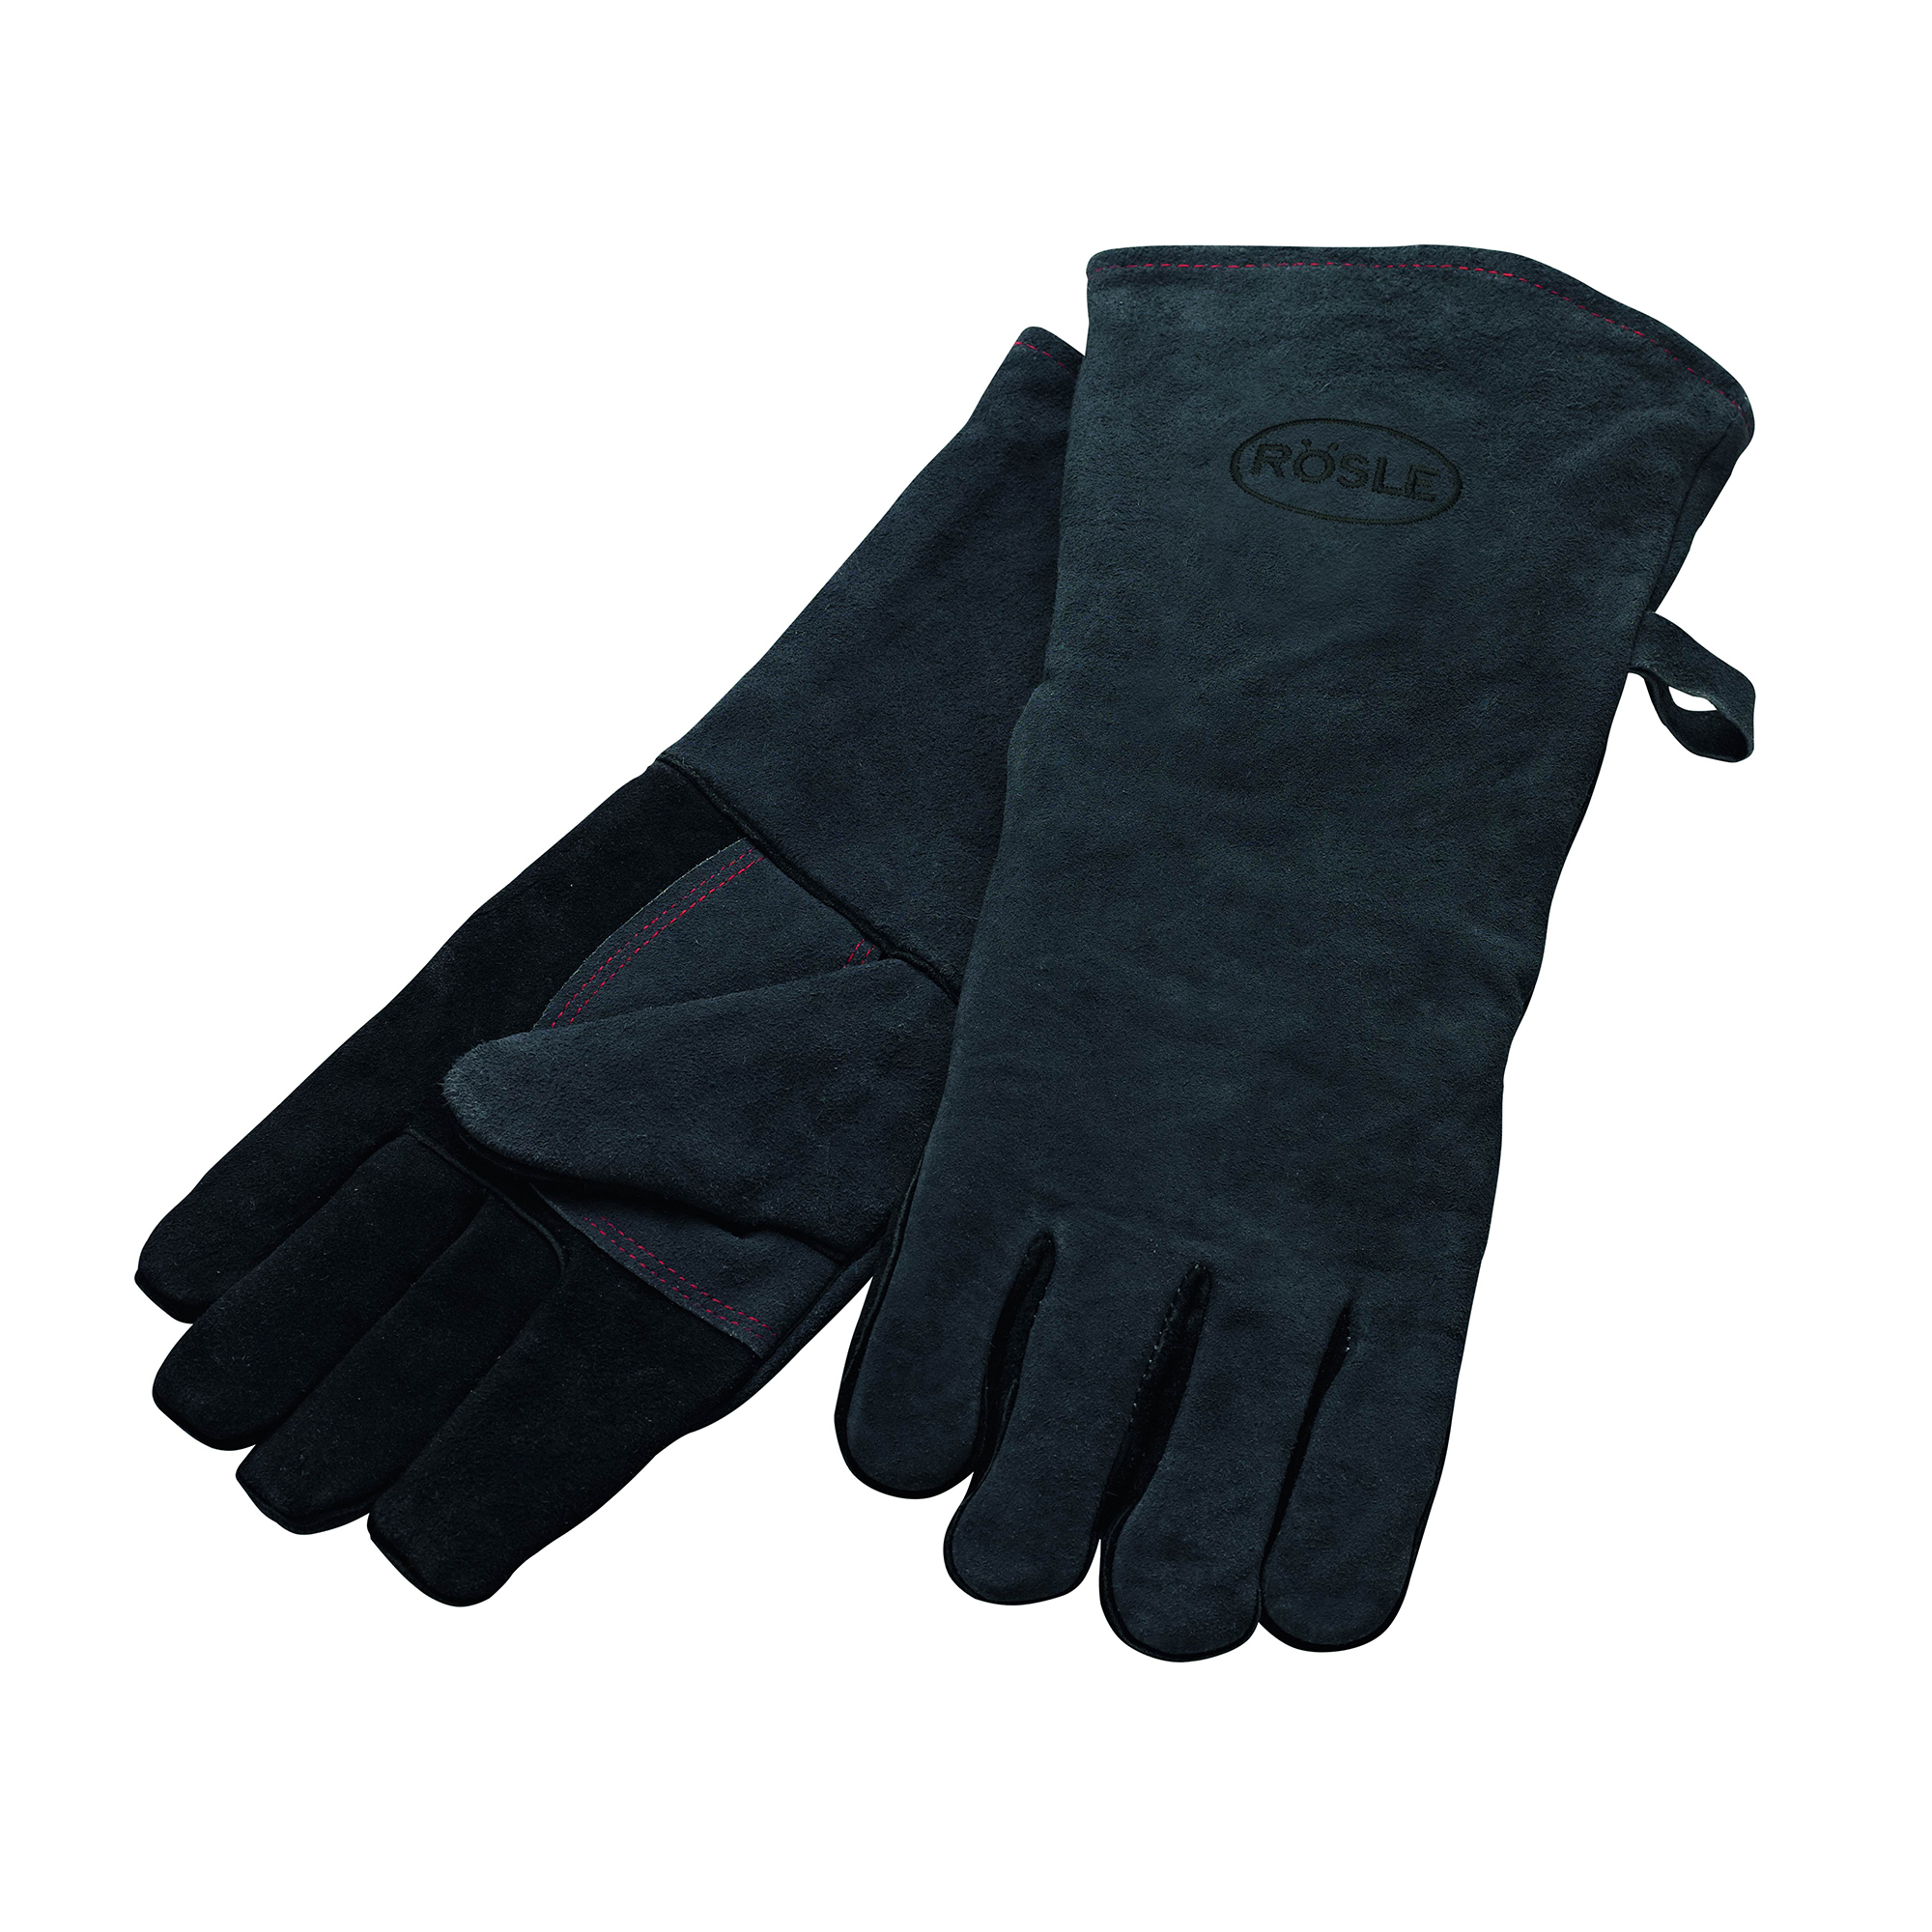 Barbecue Grill Gloves 2 pcs.